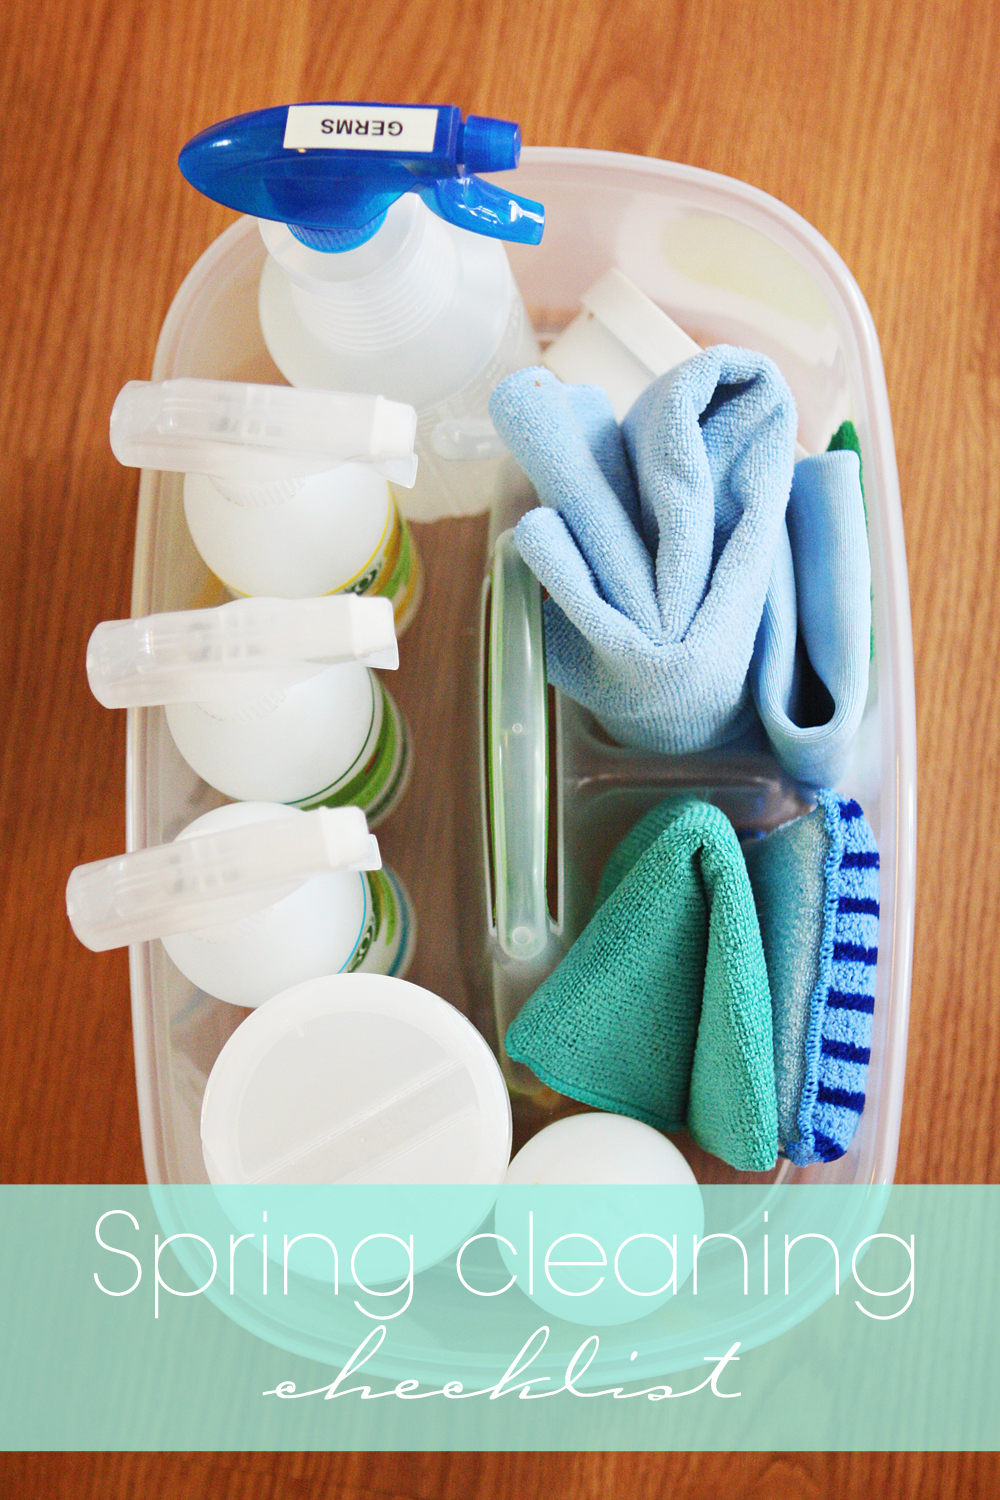 Ten Brilliant Ideas for Spring Cleaning Kids' Dirt with CIF! - Practically  Perfect Mums